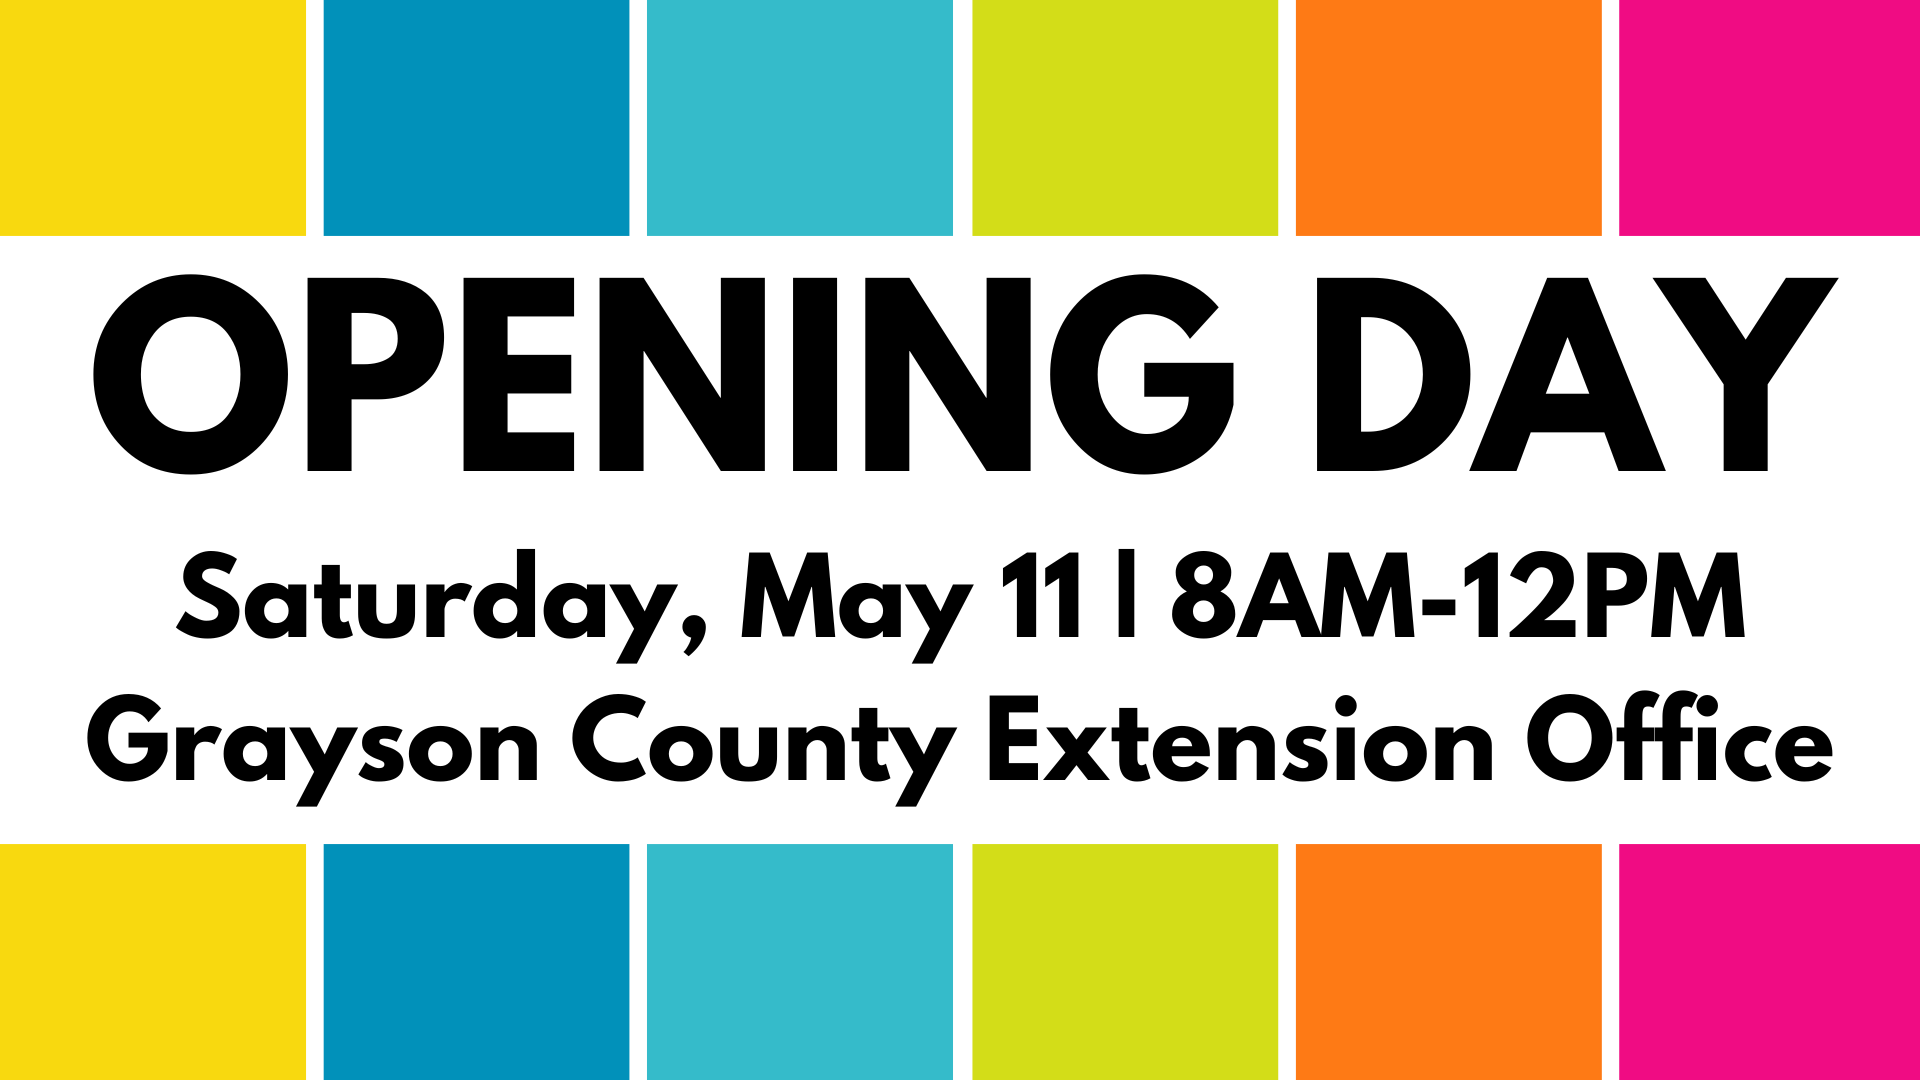 opening day grayson county farmers market saturday may 11 8am-12pm at the grayson county extension office